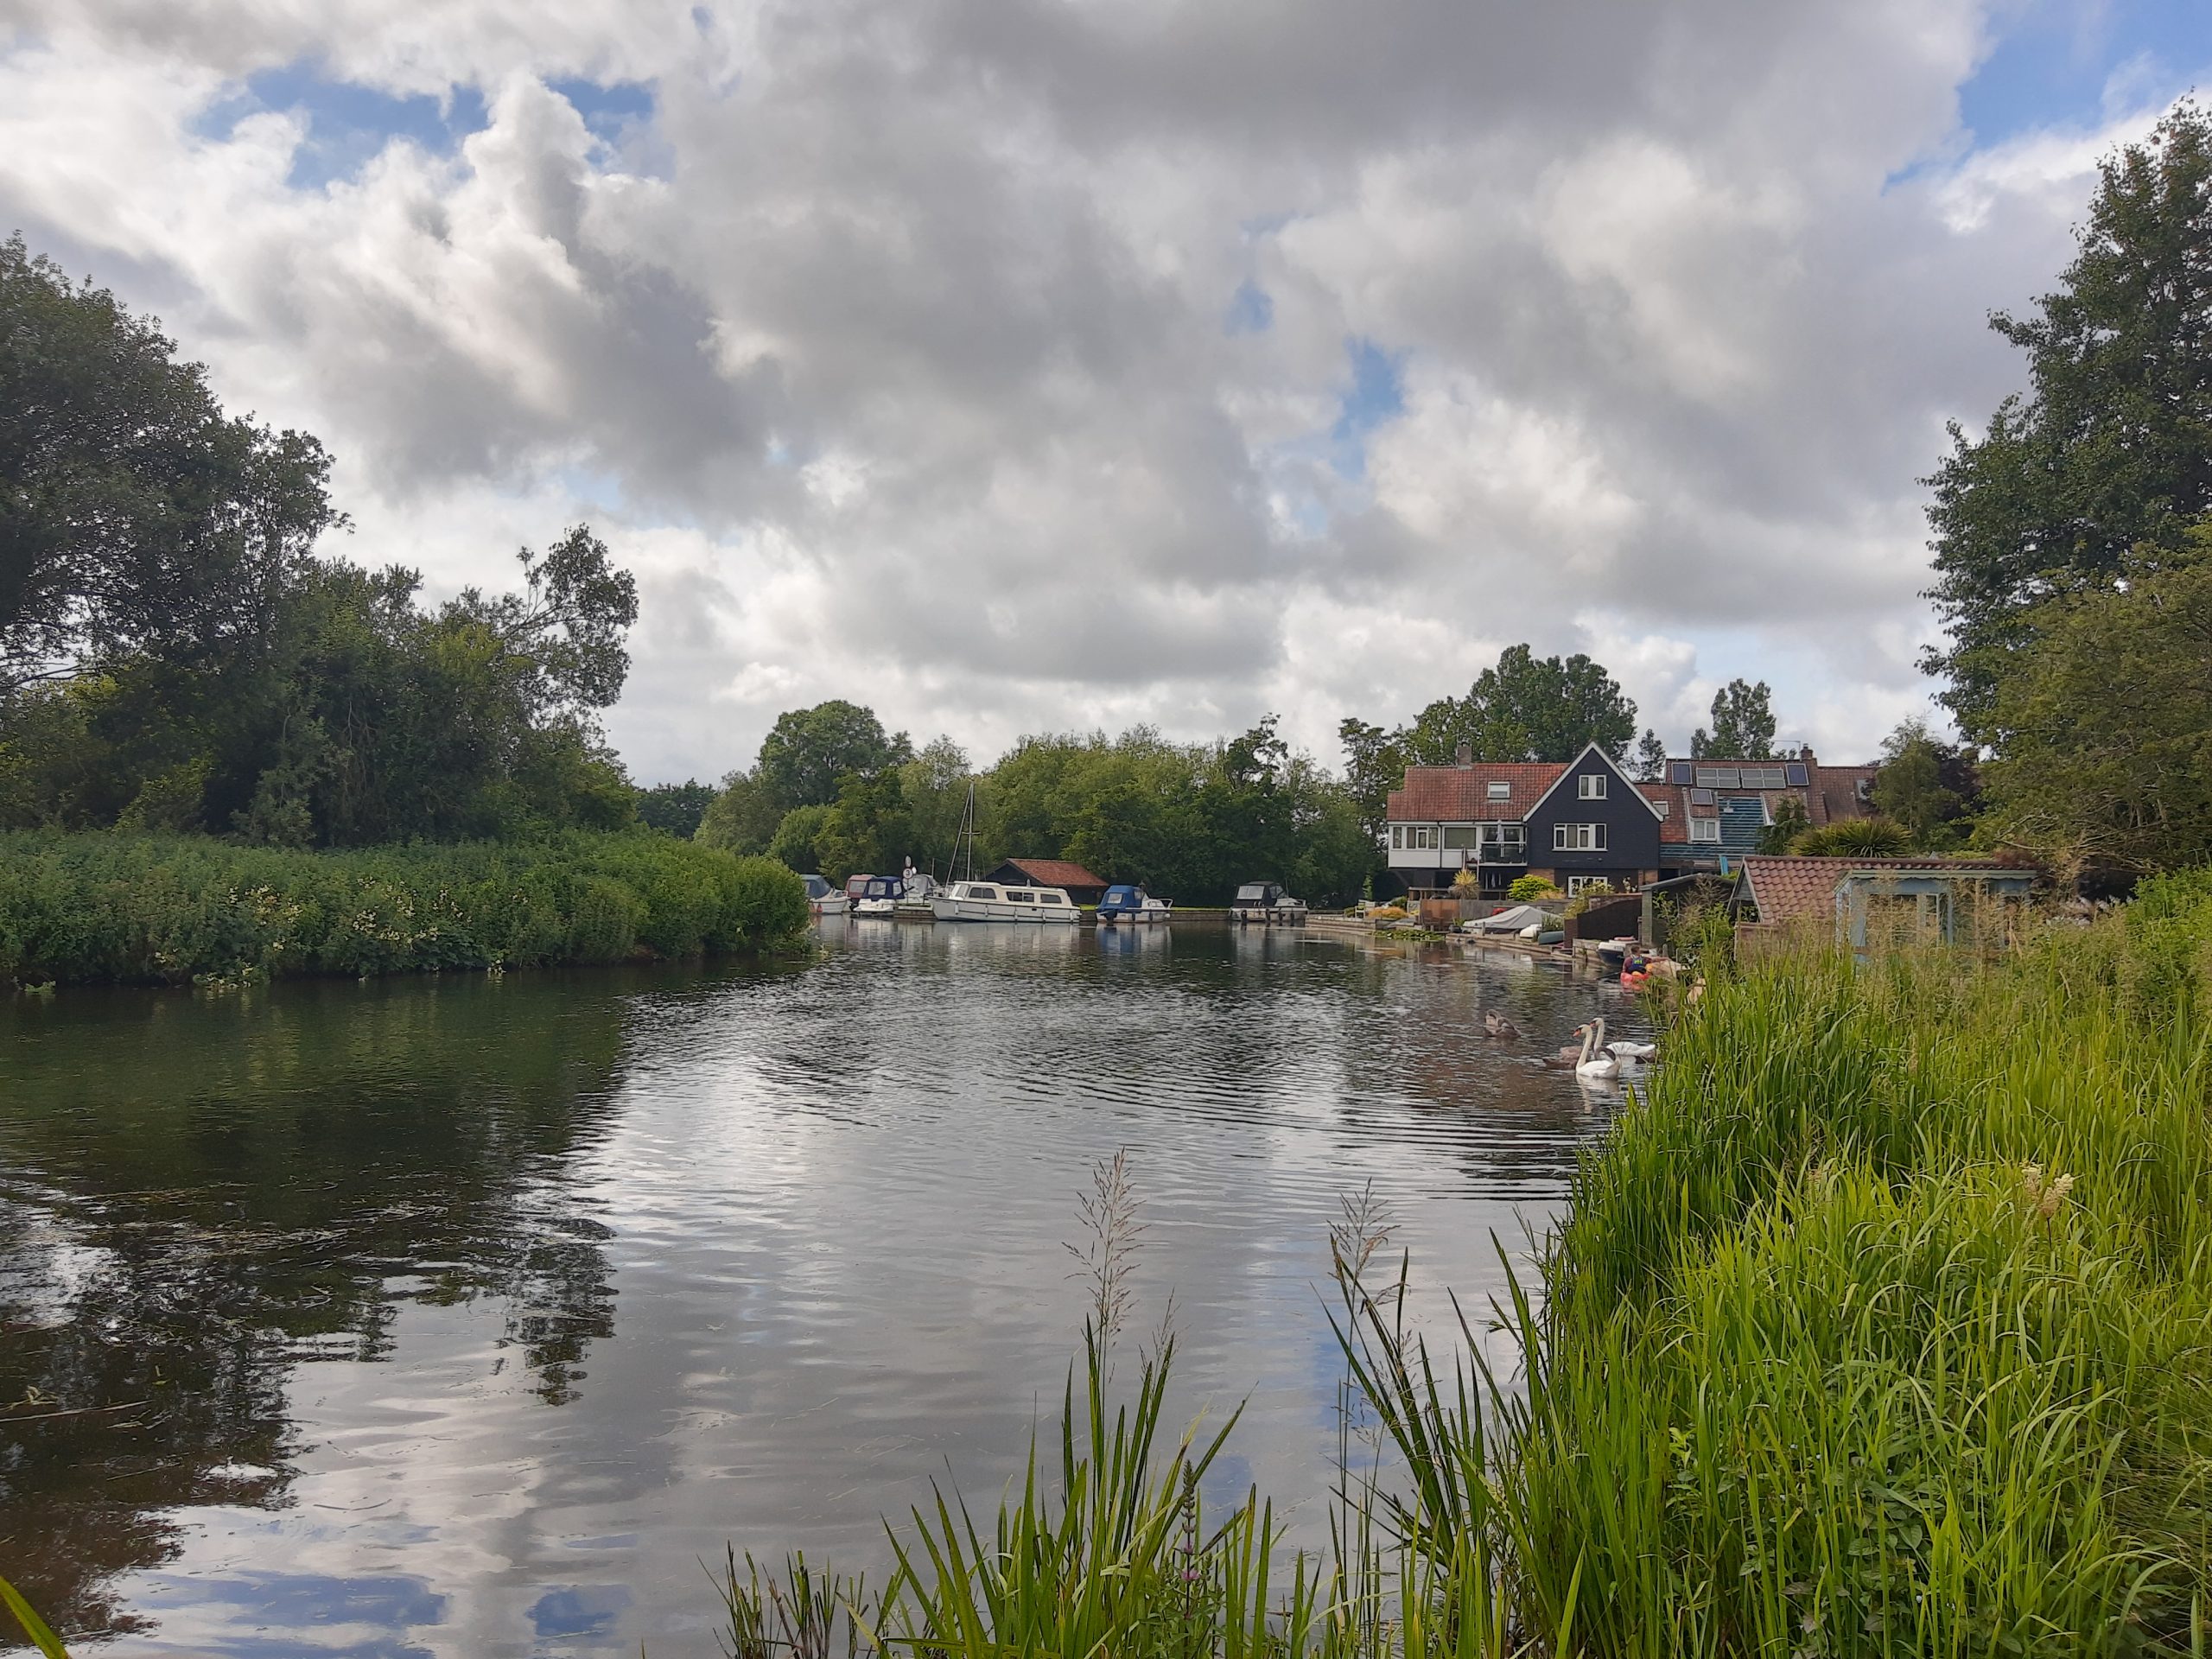 Hoveton & Wroxham: two of the most beautiful villages to visit in the Broads